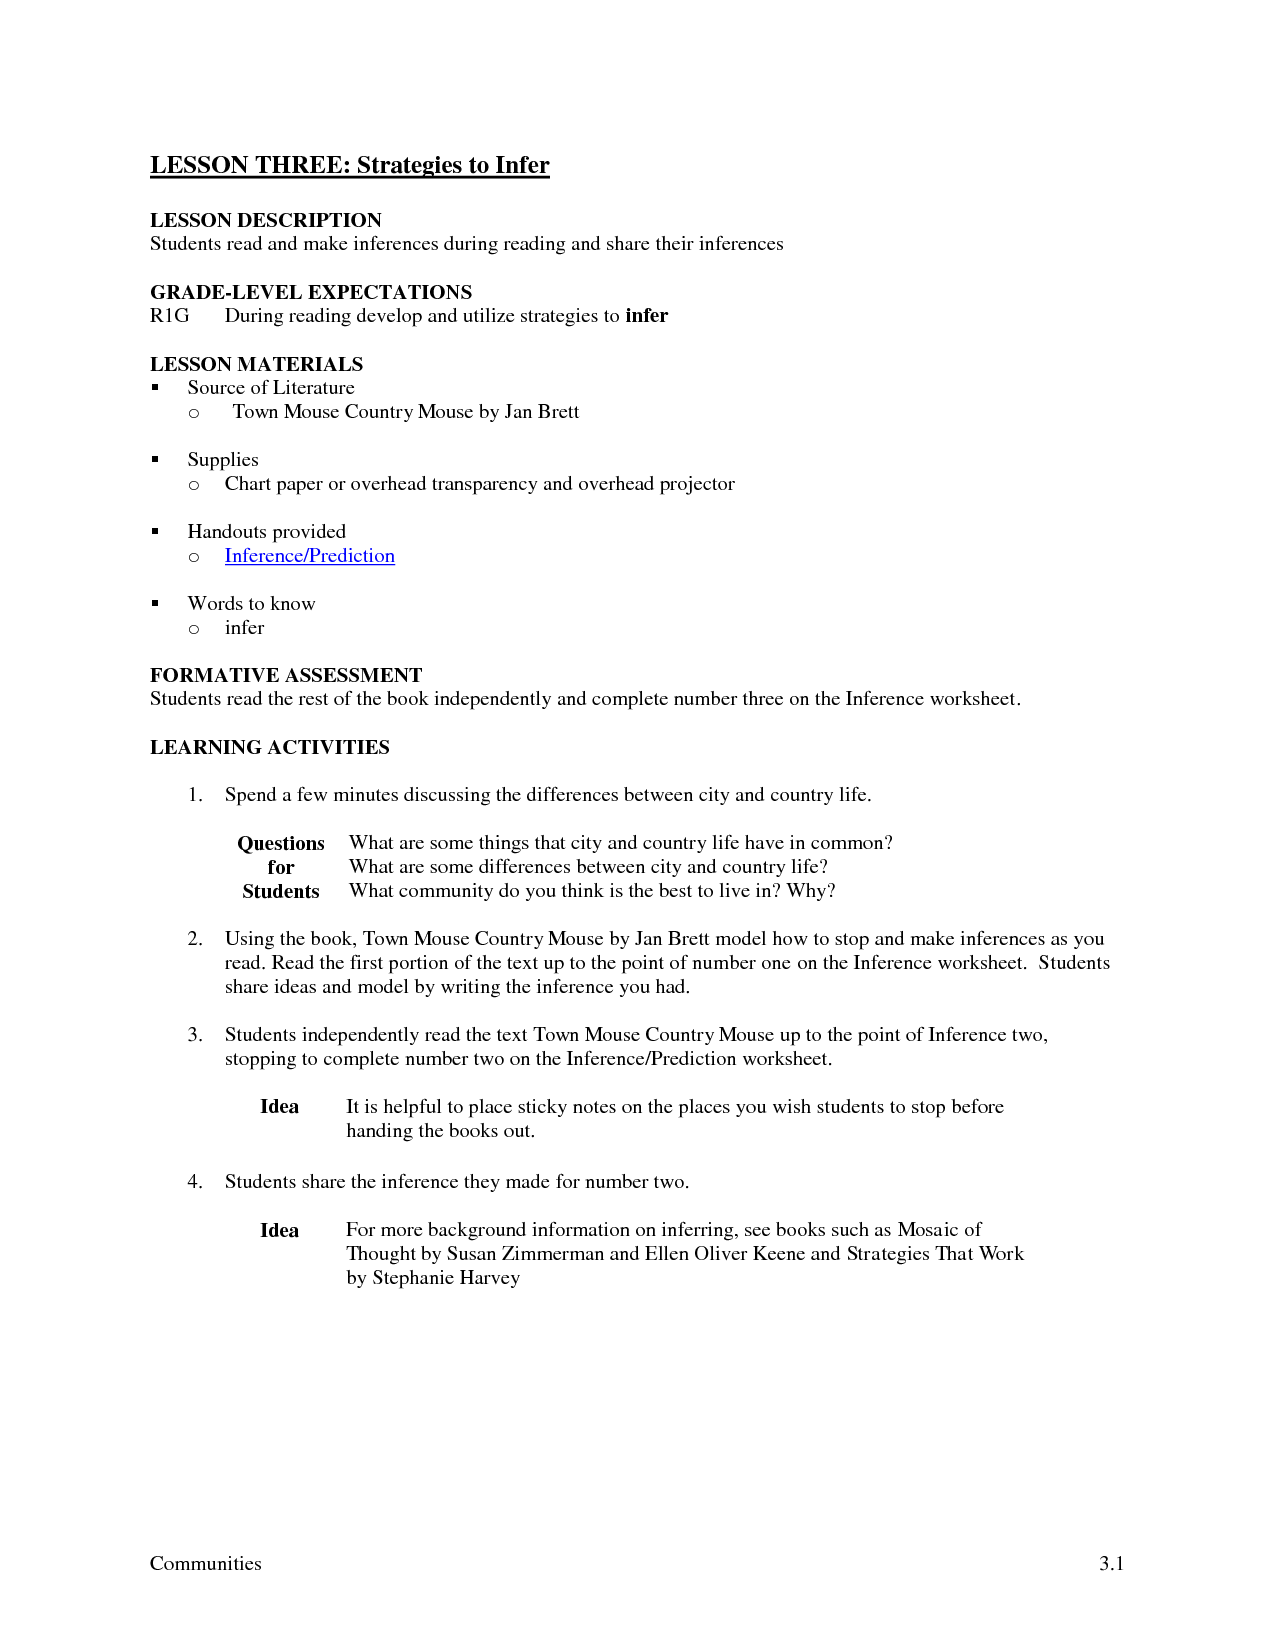 12 Best Images of Making Inferences Grade 1 Worksheet  Inference Worksheets 5th Grade 